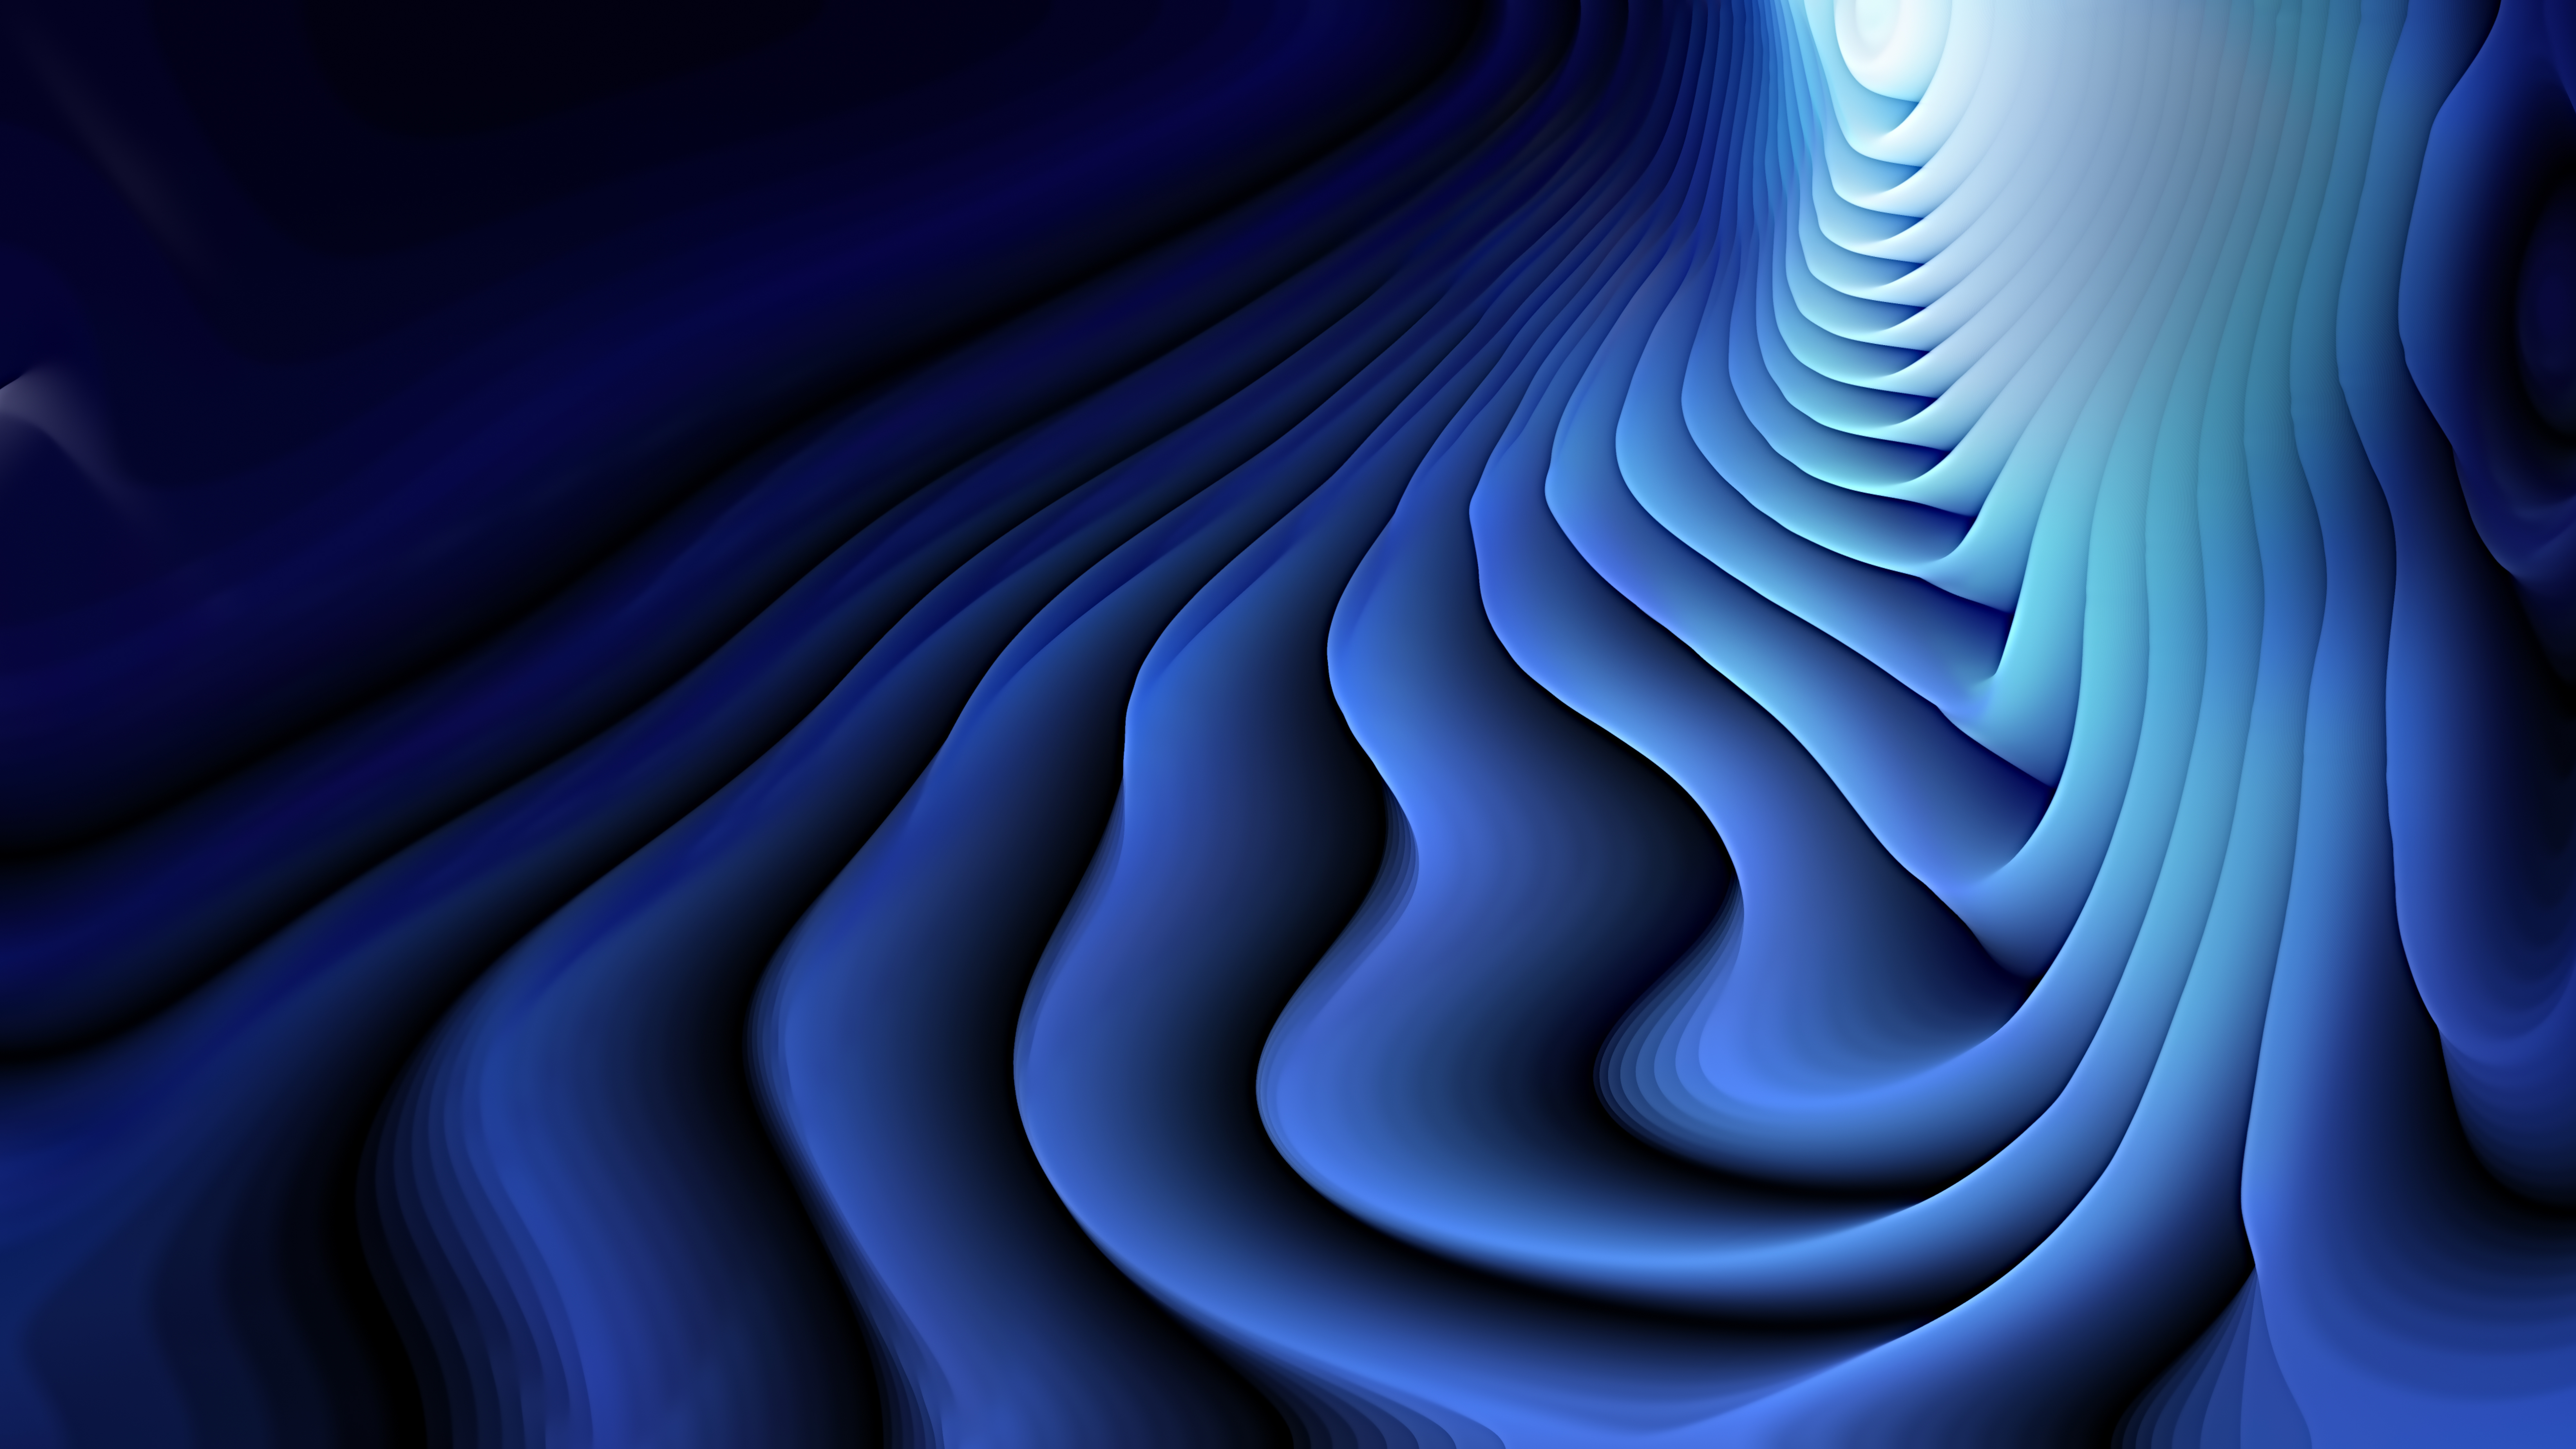 Free Abstract 3d Cool Blue Curved Lines Texture Background